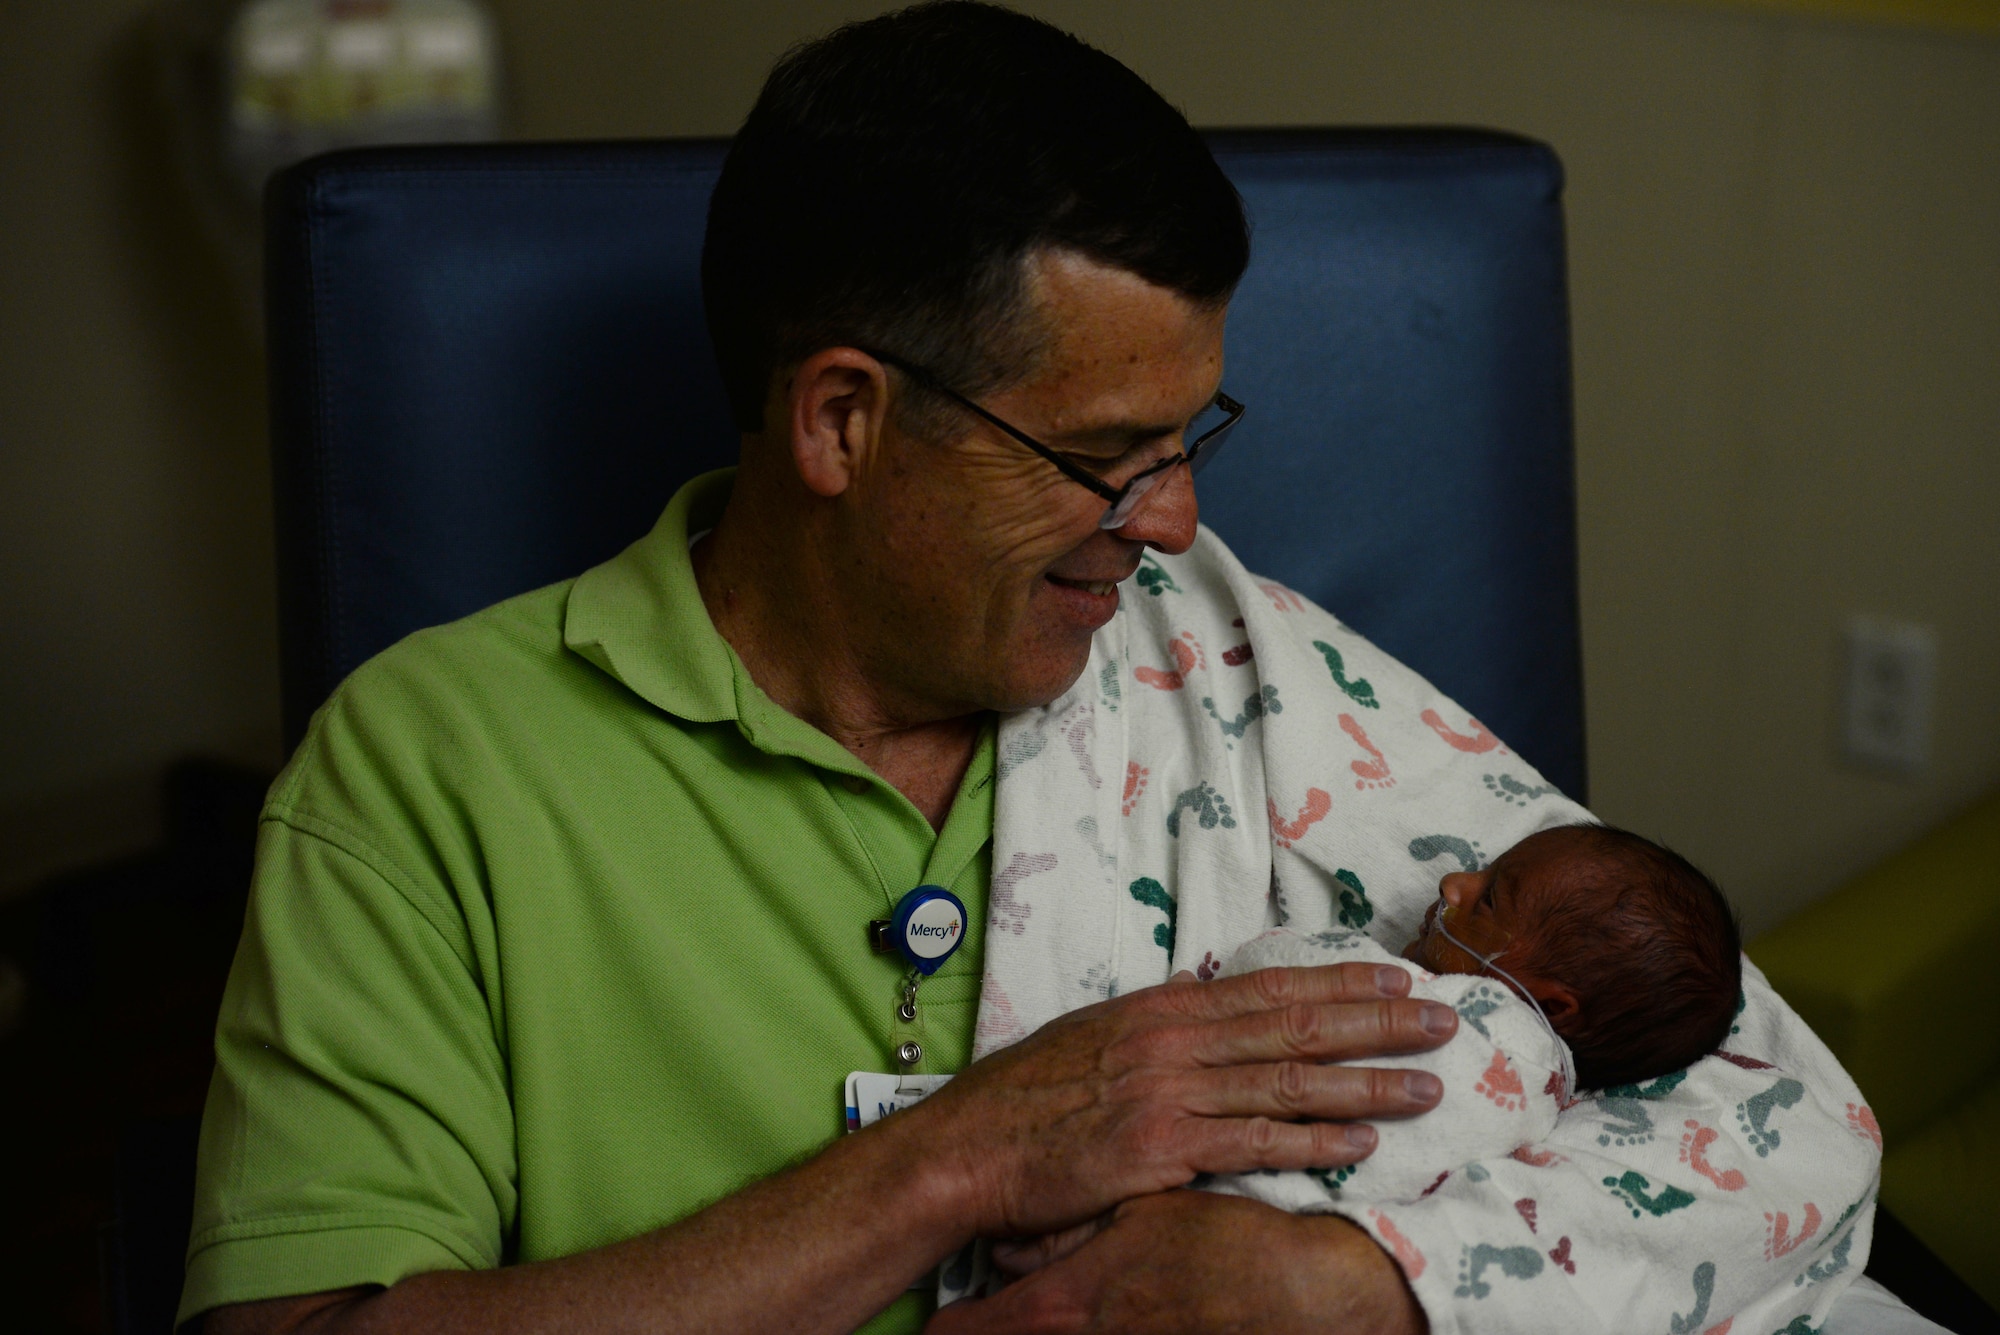 David Young, 60, Air Mobility Command current operations air mobility analyst and retired Air Force pilot, holds the premature grandson of a retired Air Force member while in the Neonatal Intensive Care Unit at Mercy Hospital in St. Louis, April 19, 2019. Young has been a volunteer for the hospital’s “cuddler program” for a year and a half. He has eight children of his own and was interested in the program because his youngest child, now 17 years old, was born eight weeks early. (U.S. Air Force photo by Airman 1st Class Miranda Simpson)